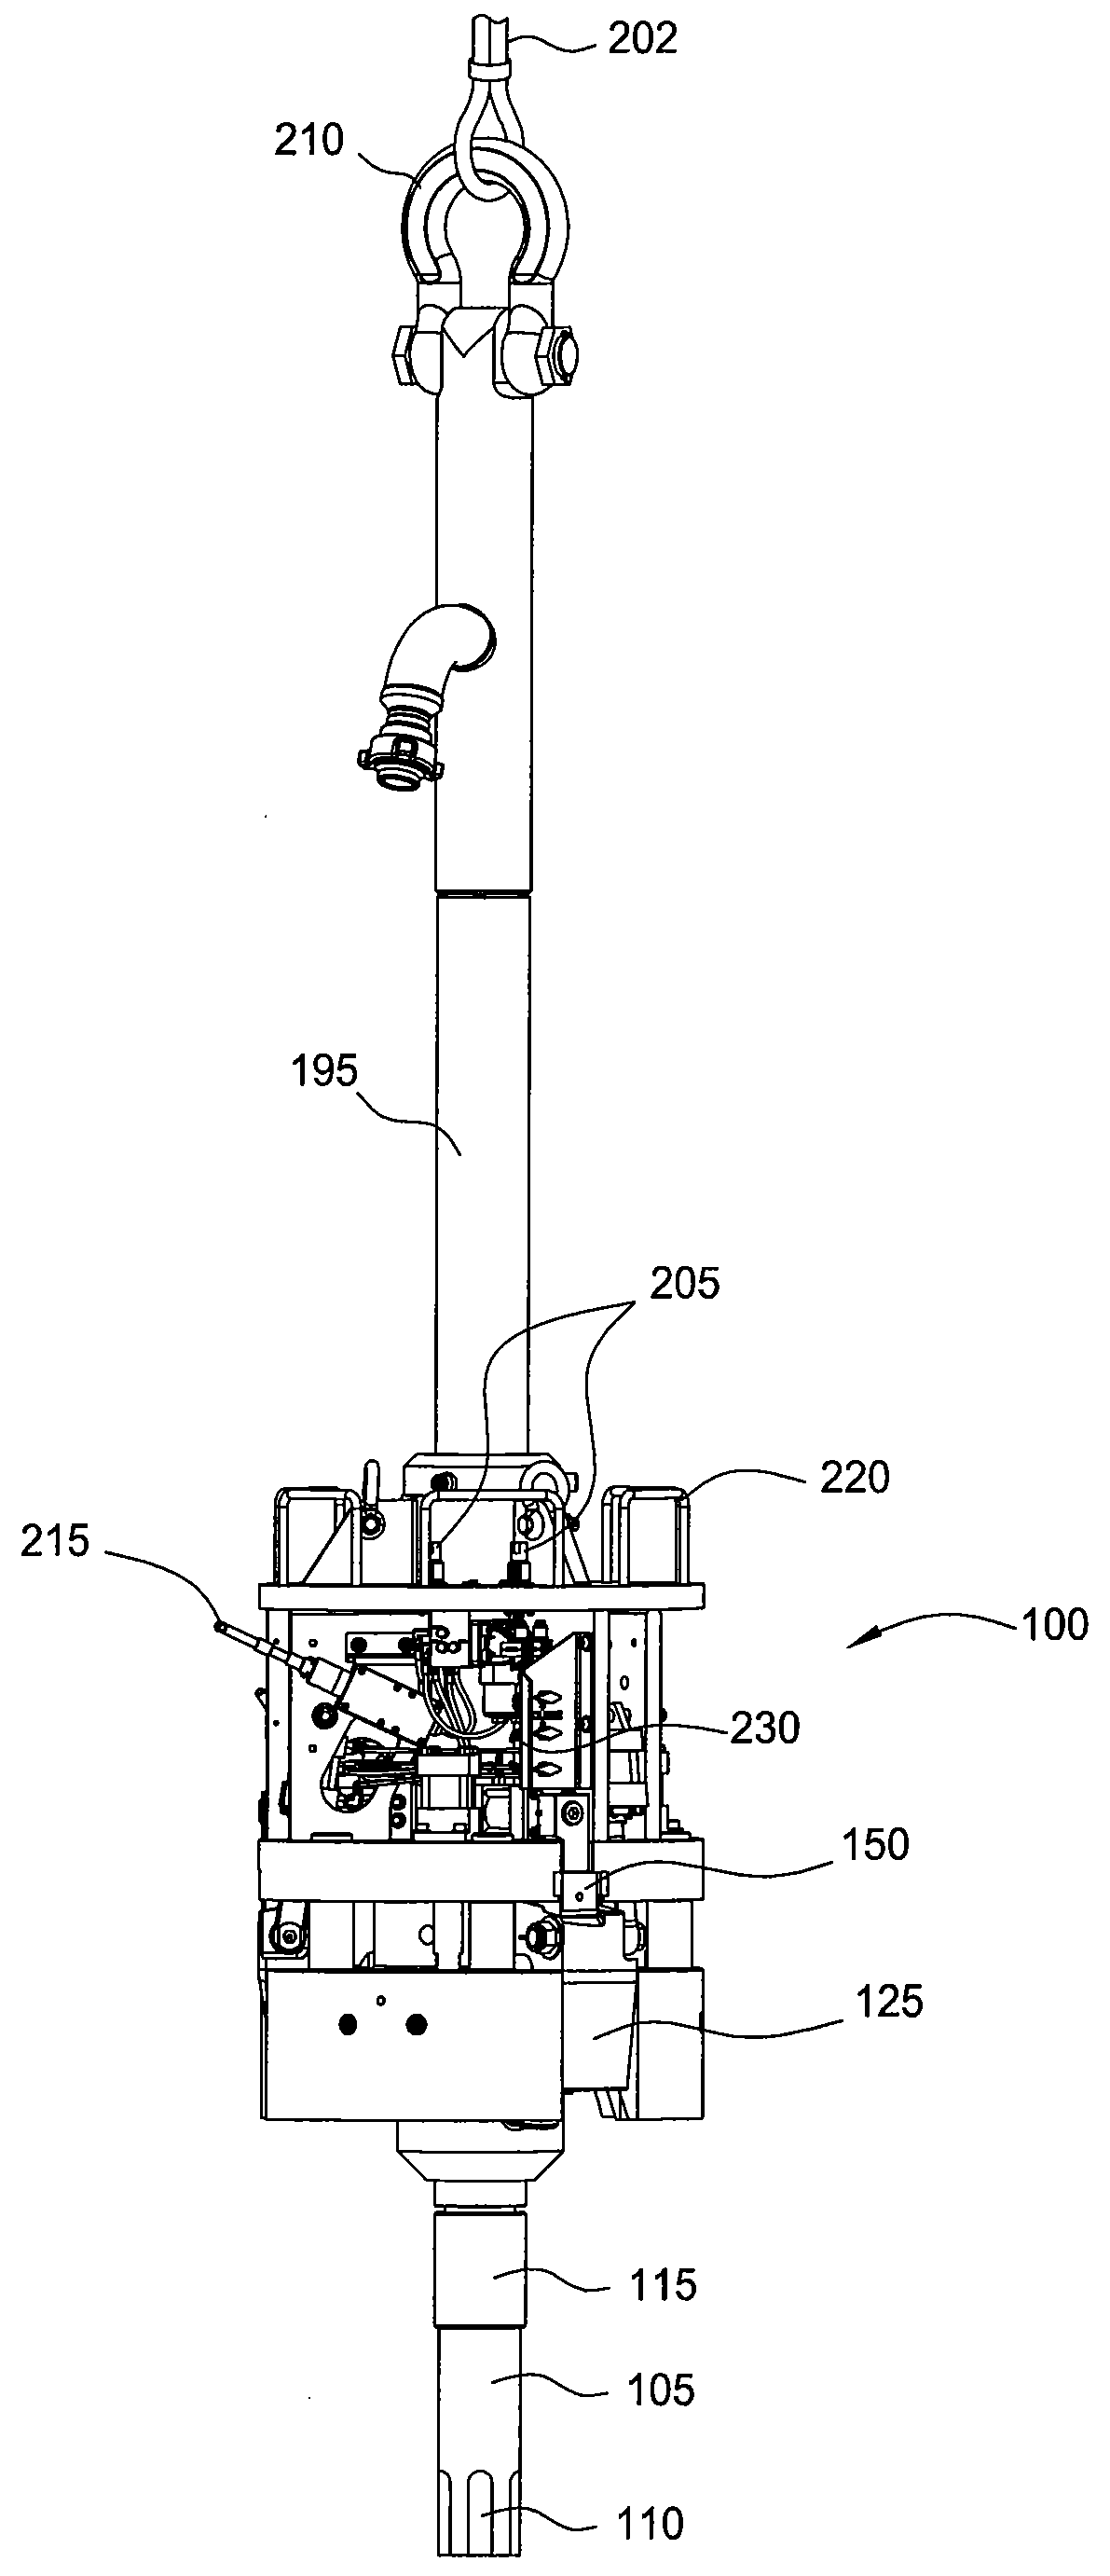 Methods and apparatus for subsea well intervention and subsea wellhead retrieval